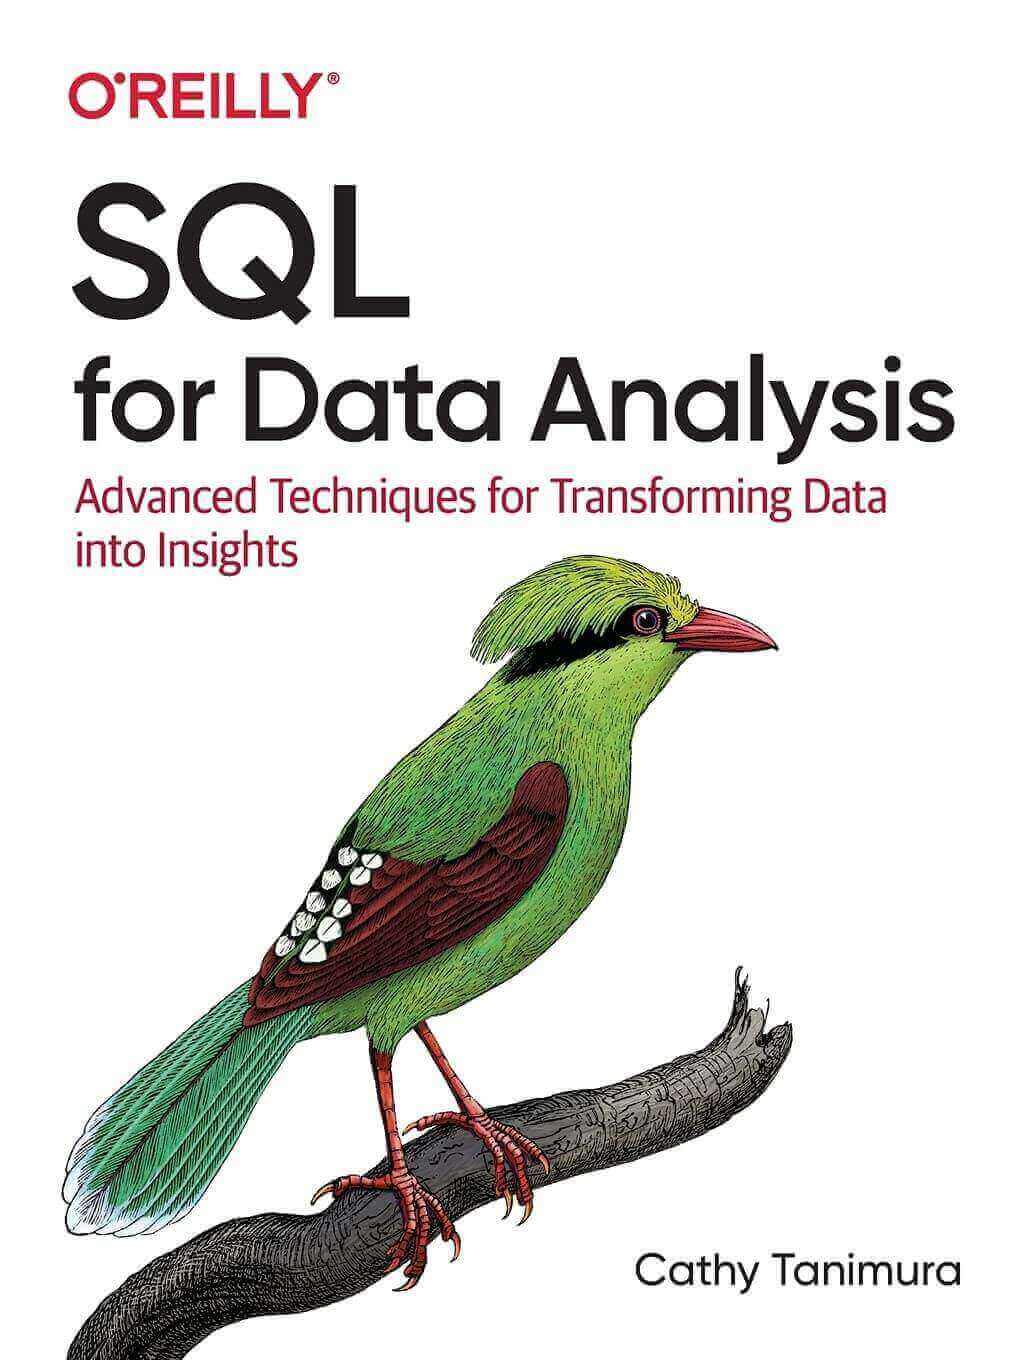 "SQL for Data Analysis: Advanced Techniques for Transforming Data Into Insights" by Cathy Tanimura